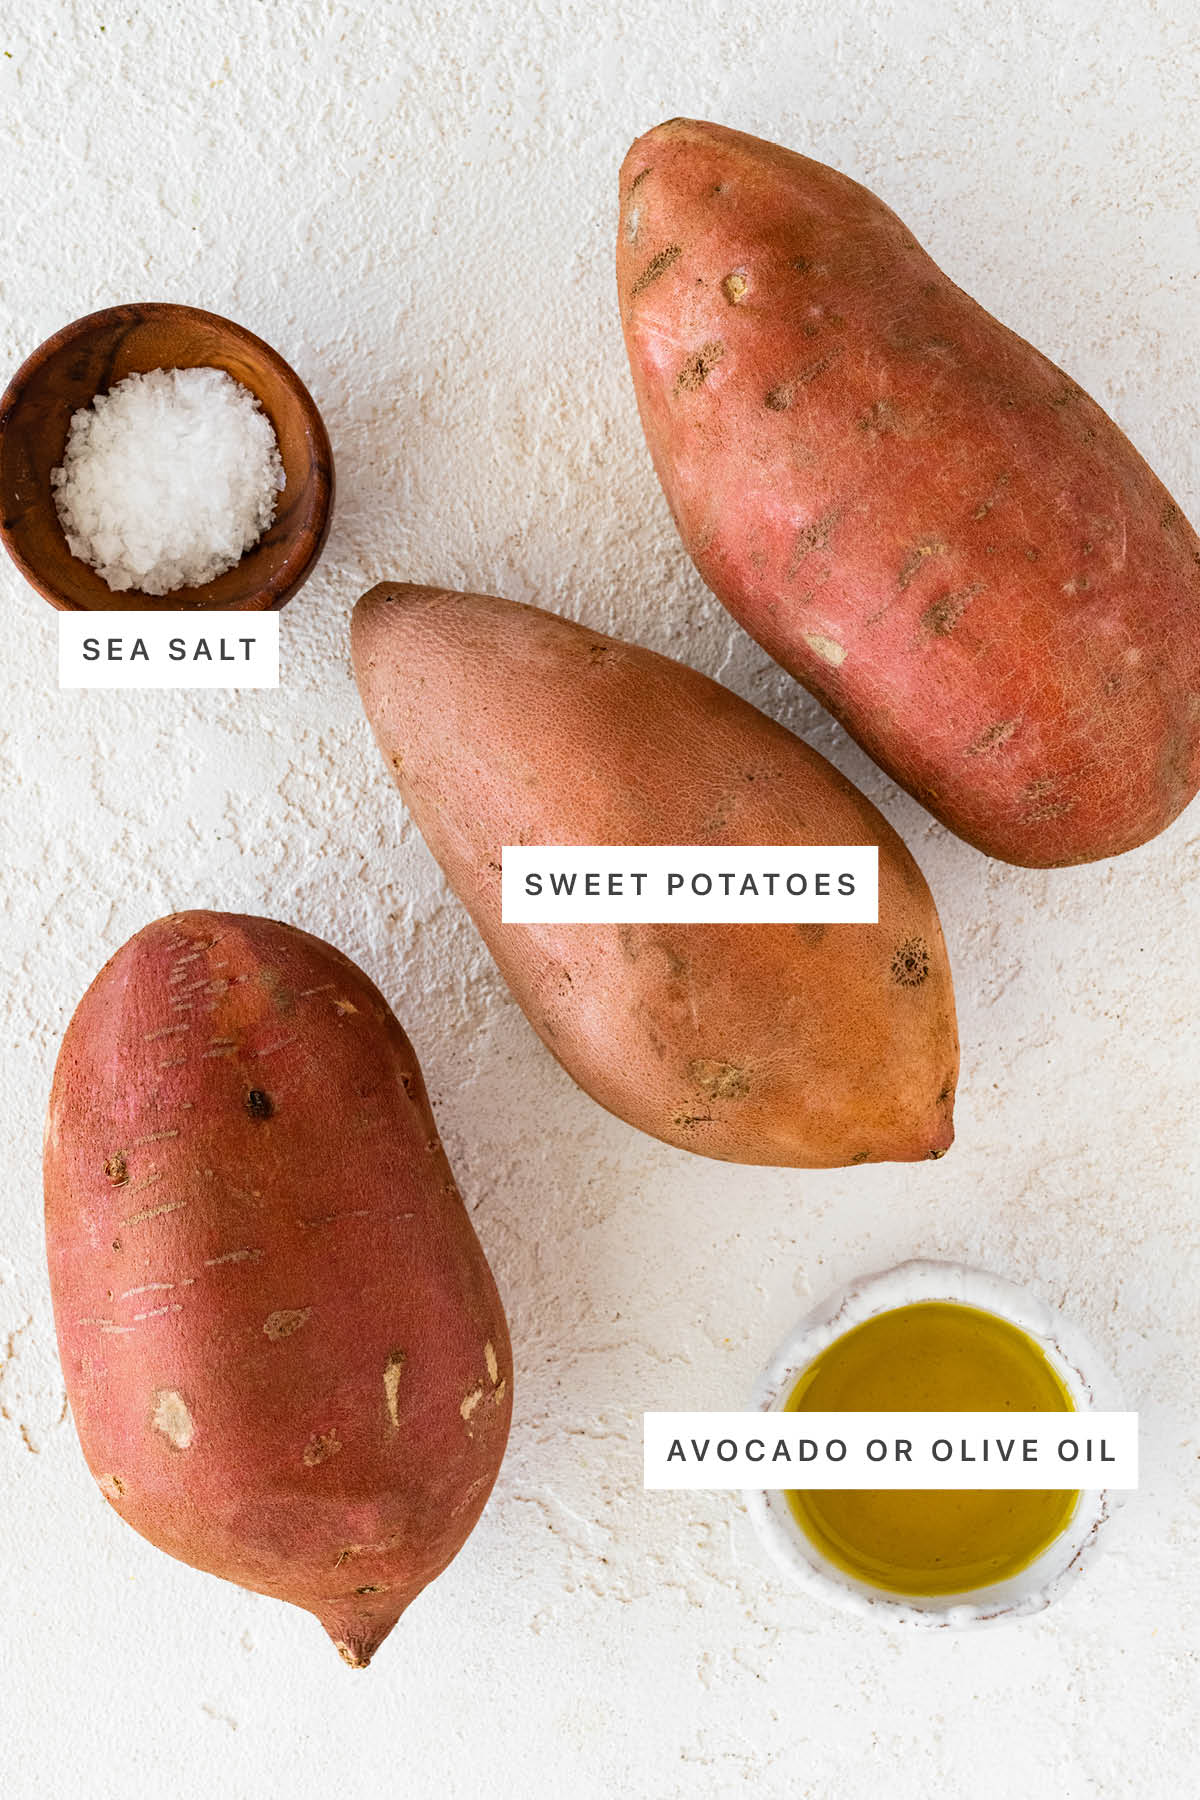 Ingredients measured out to make Perfect Baked Sweet Potato: sea salt, sweet potatoes and olive oil.